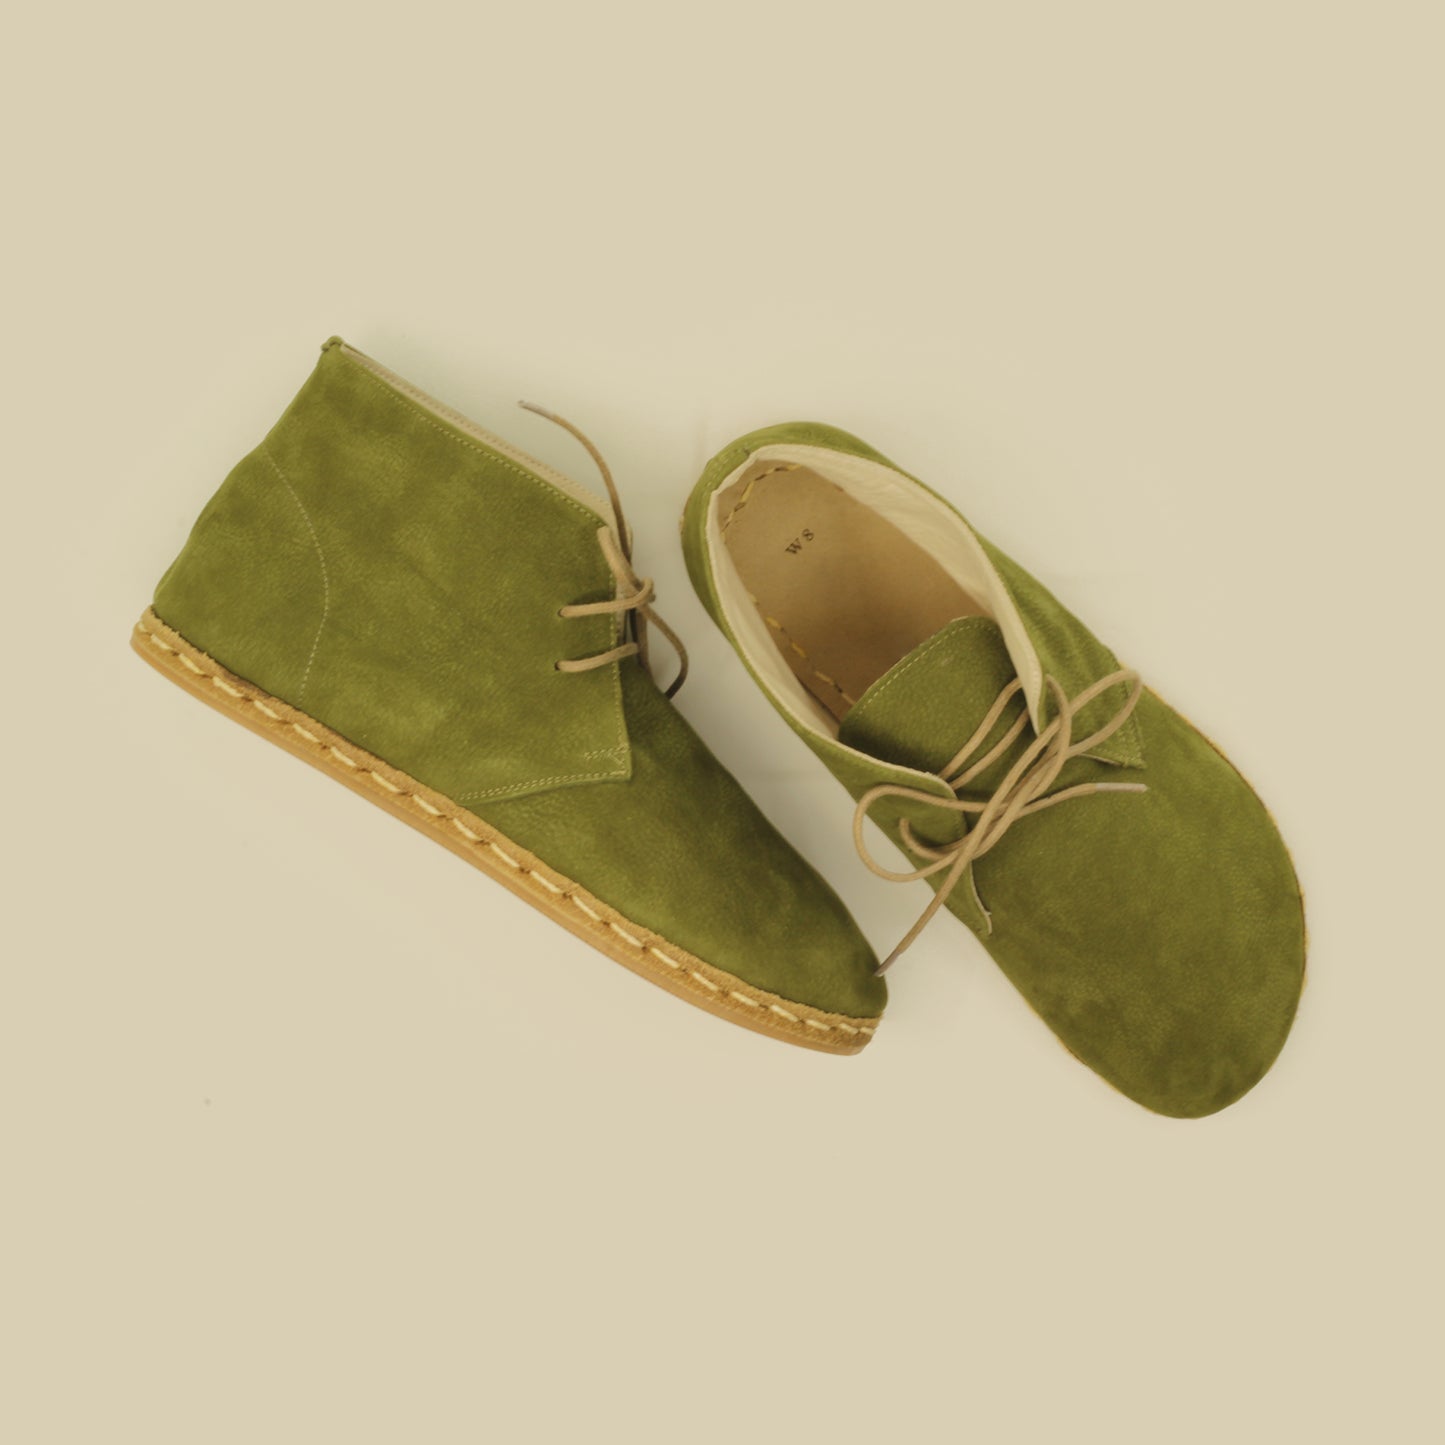 Oxford Ankle Barefoot all leather Women Boots - Green Nubuck - Zero Drop - Rubber Sole